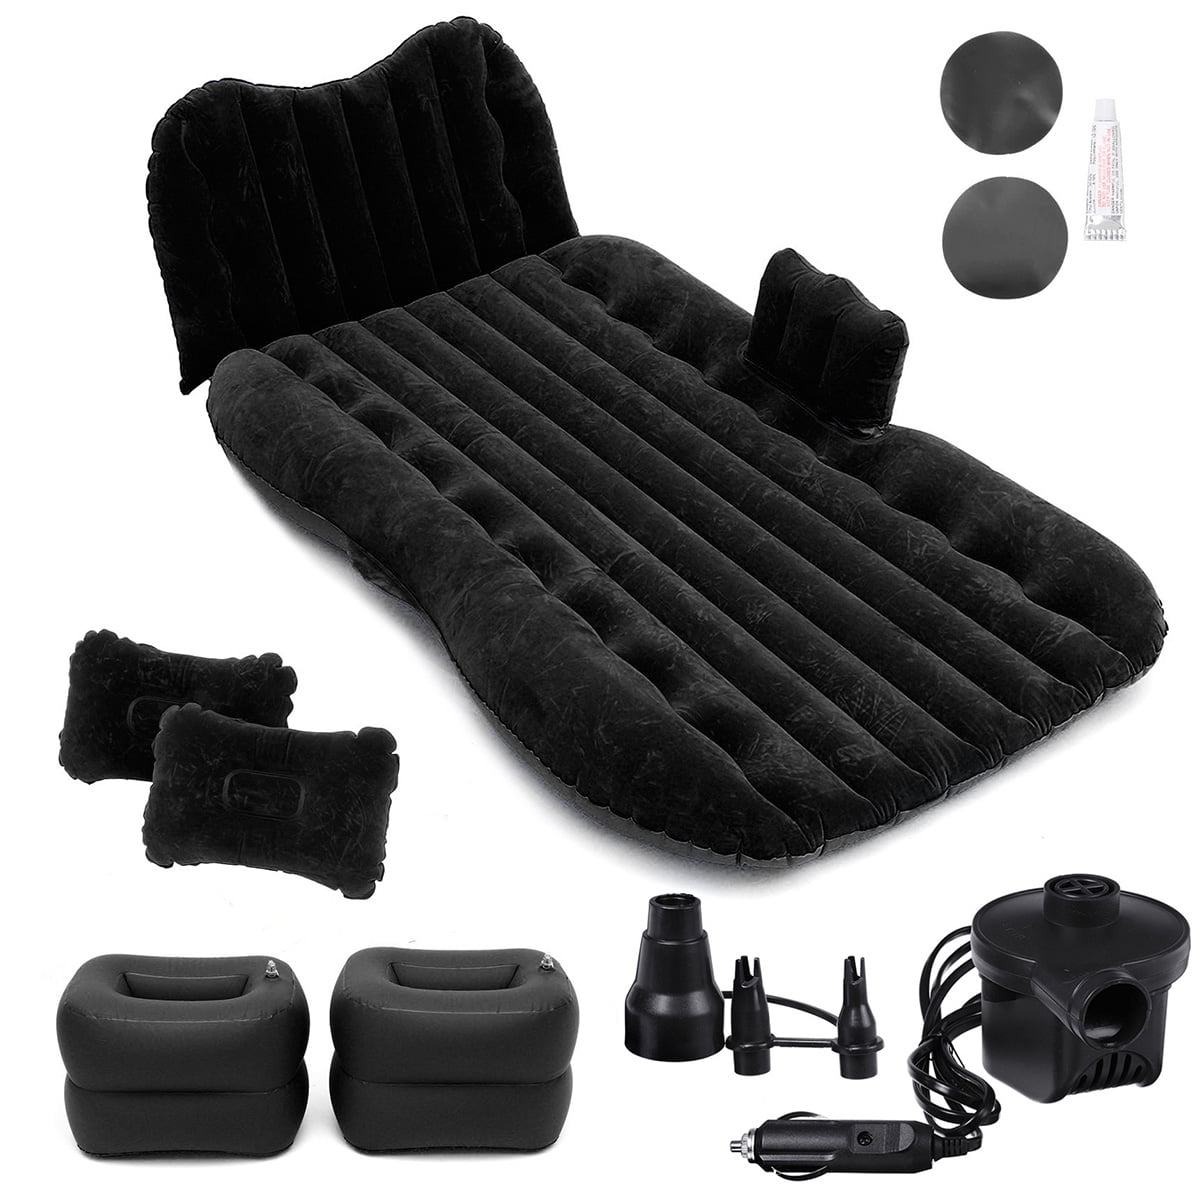 Inflatable Travel Camping Car Seat Sleep Rest Mattress Air Bed with Pillow Black 